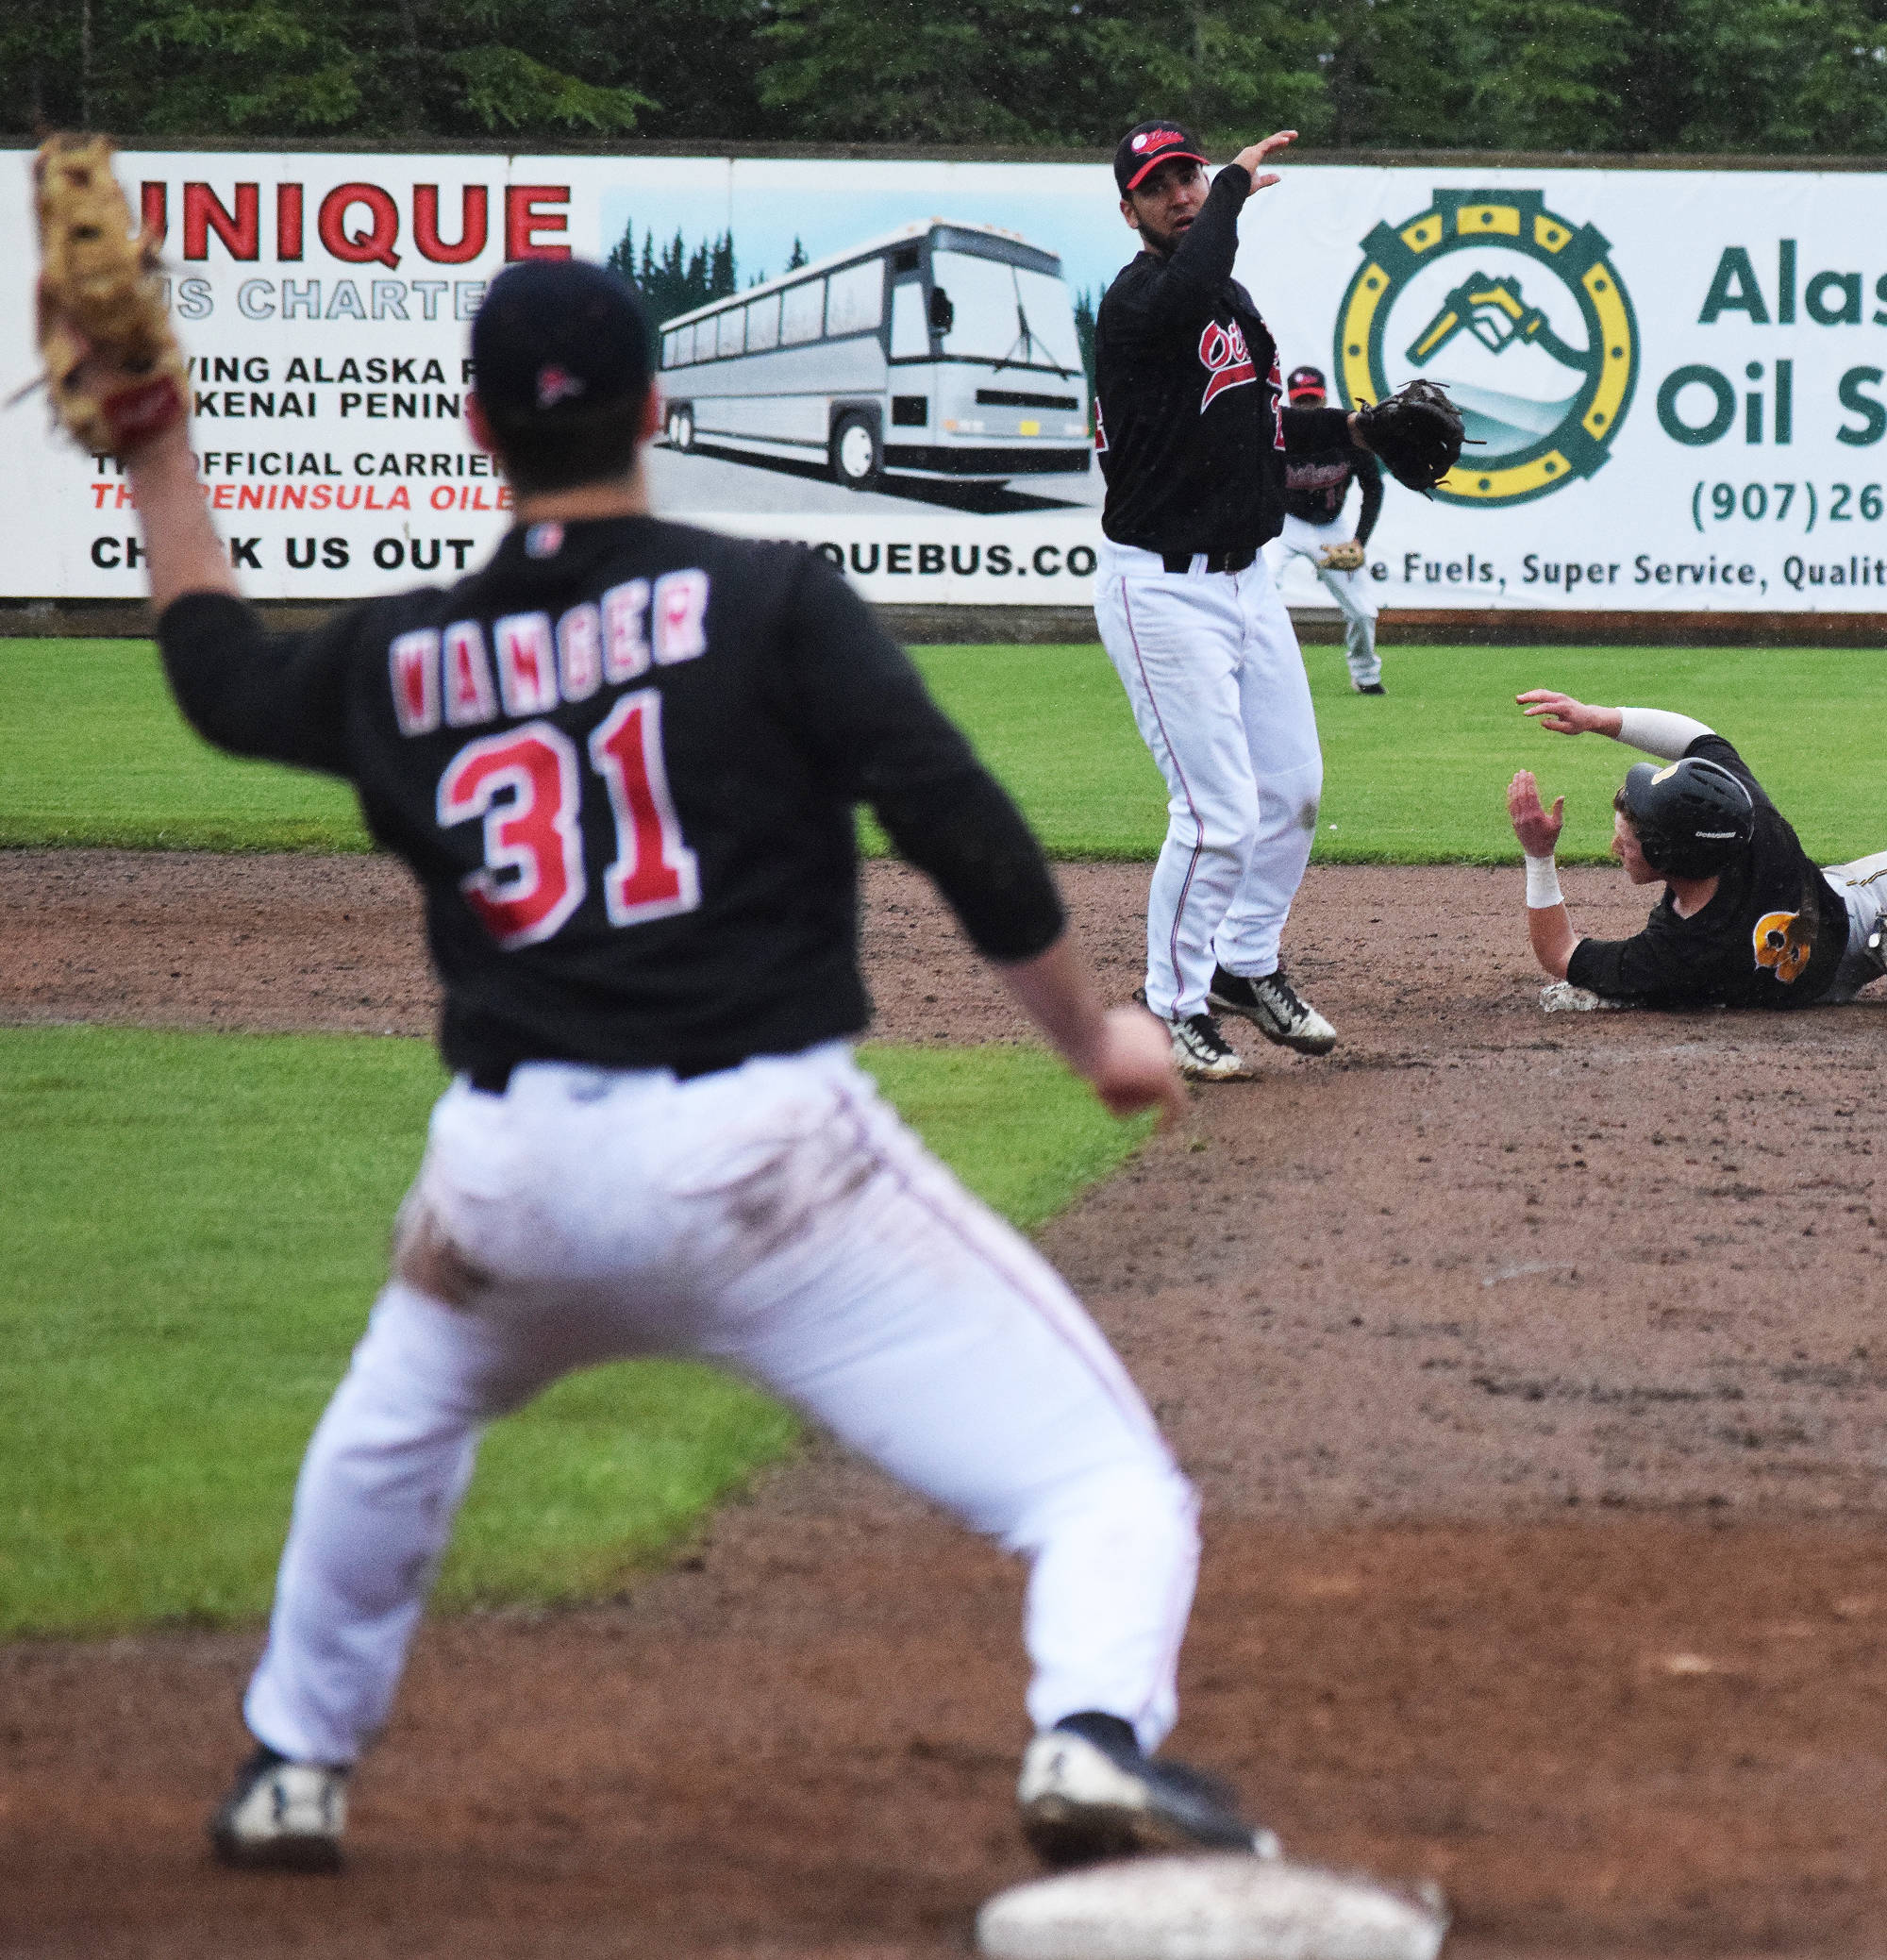 Peninsula Oilers second baseman Ryan Smith lobs a double play throw to first baseman Benjamin Wanger against the Anchorage Bucs Wednesday night at Coral Seymour Memorial Park in Kenai. (Photo by Joey Klecka/Peninsula Clarion) Peninsula Oilers second baseman Ryan Smith lobs a double play throw to first baseman Benjamin Wanger against the Anchorage Bucs Wednesday night at Coral Seymour Memorial Ballpark in Kenai. (Photo by Joey Klecka/Peninsula Clarion)